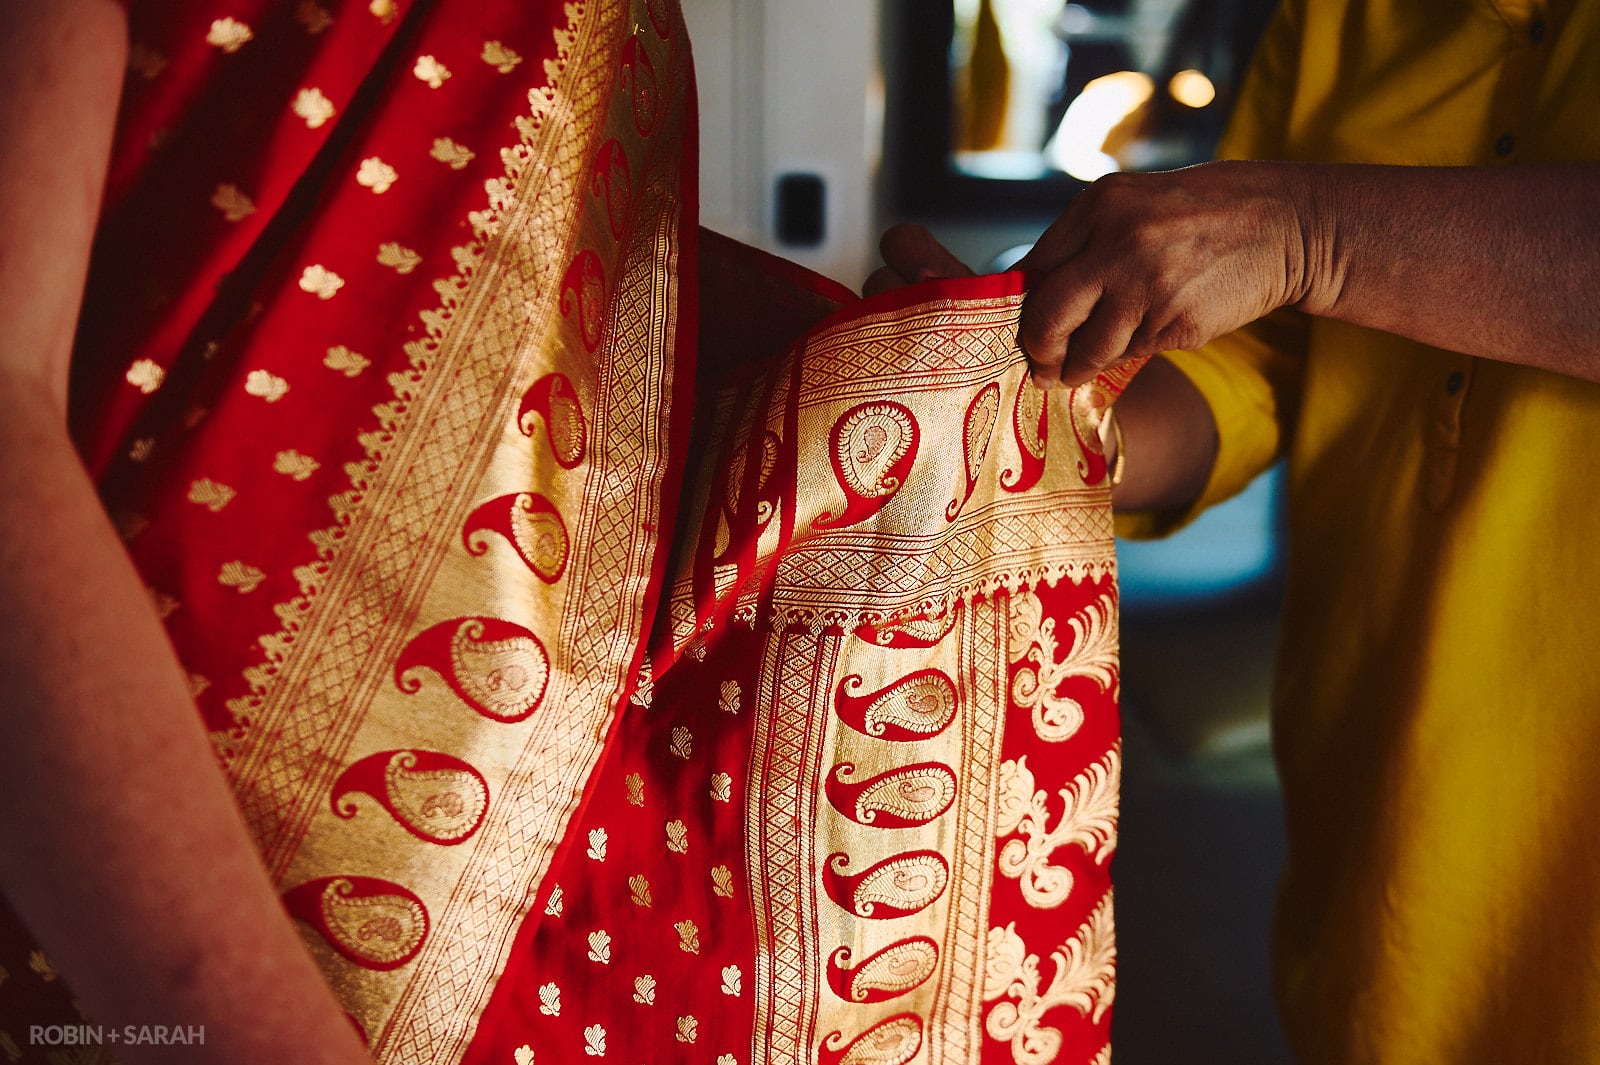 Bride gets help with putting on Indian wedding saree